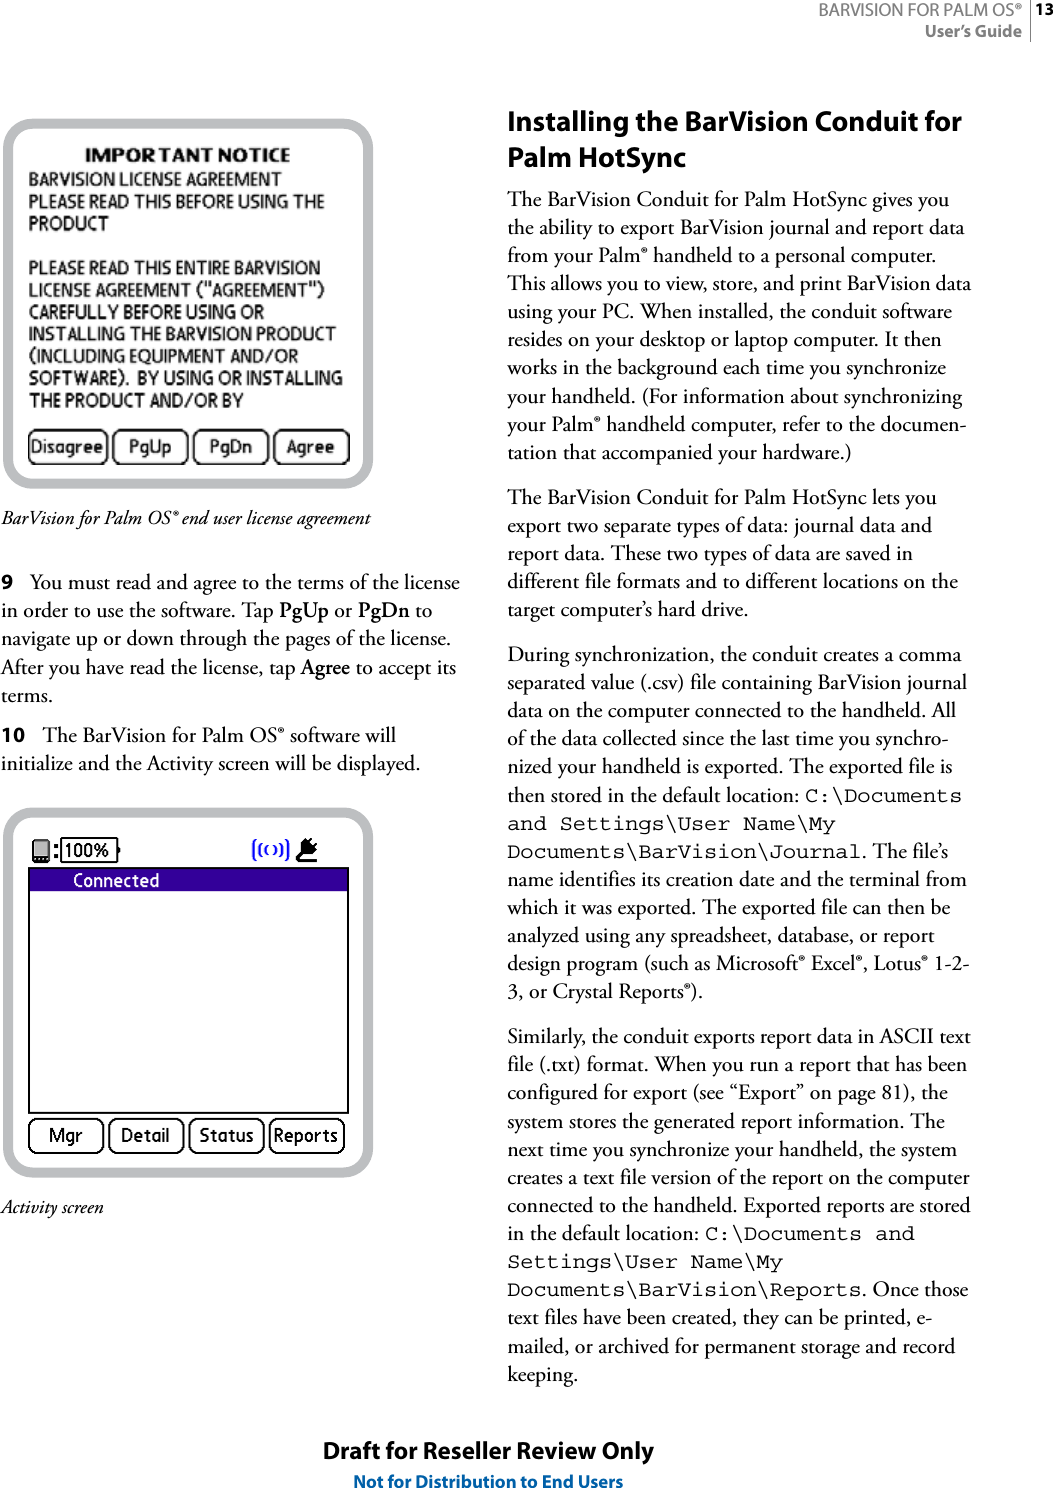 13BARVISION FOR PALM OS®User’s GuideDraft for Reseller Review OnlyNot for Distribution to End UsersBarVision for Palm OS® end user license agreement9You must read and agree to the terms of the license in order to use the software. Tap PgUp or PgDn to navigate up or down through the pages of the license. After you have read the license, tap Agree to accept its terms.10 The BarVision for Palm OS® software will initialize and the Activity screen will be displayed.Activity screenInstalling the BarVision Conduit for Palm HotSyncThe BarVision Conduit for Palm HotSync gives you the ability to export BarVision journal and report data from your Palm® handheld to a personal computer. This allows you to view, store, and print BarVision data using your PC. When installed, the conduit software resides on your desktop or laptop computer. It then works in the background each time you synchronize your handheld. (For information about synchronizing your Palm® handheld computer, refer to the documen-tation that accompanied your hardware.)The BarVision Conduit for Palm HotSync lets you export two separate types of data: journal data and report data. These two types of data are saved in different file formats and to different locations on the target computer’s hard drive.During synchronization, the conduit creates a comma separated value (.csv) file containing BarVision journal data on the computer connected to the handheld. All of the data collected since the last time you synchro-nized your handheld is exported. The exported file is then stored in the default location: C:\Documentsand Settings\User Name\My Documents\BarVision\Journal. The file’s name identifies its creation date and the terminal from which it was exported. The exported file can then be analyzed using any spreadsheet, database, or report design program (such as Microsoft® Excel®, Lotus® 1-2-3, or Crystal Reports®).Similarly, the conduit exports report data in ASCII text file (.txt) format. When you run a report that has been configured for export (see “Export” on page 81), the system stores the generated report information. The next time you synchronize your handheld, the system creates a text file version of the report on the computer connected to the handheld. Exported reports are stored in the default location: C:\Documents and Settings\User Name\My Documents\BarVision\Reports. Once those text files have been created, they can be printed, e-mailed, or archived for permanent storage and record keeping.